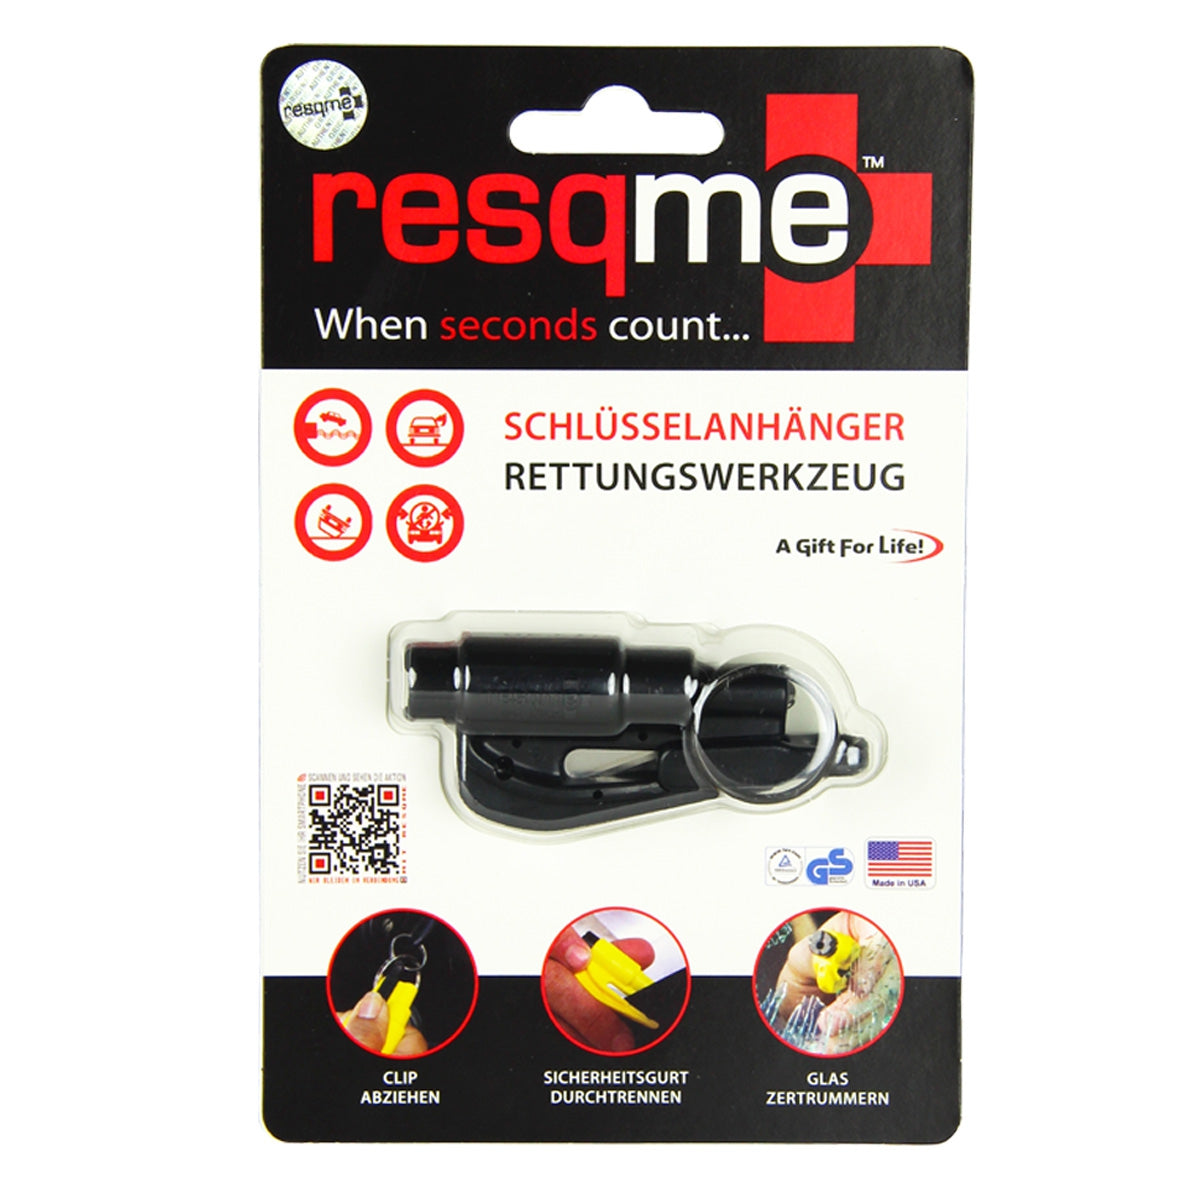 Resqume - rescue tool with keychain